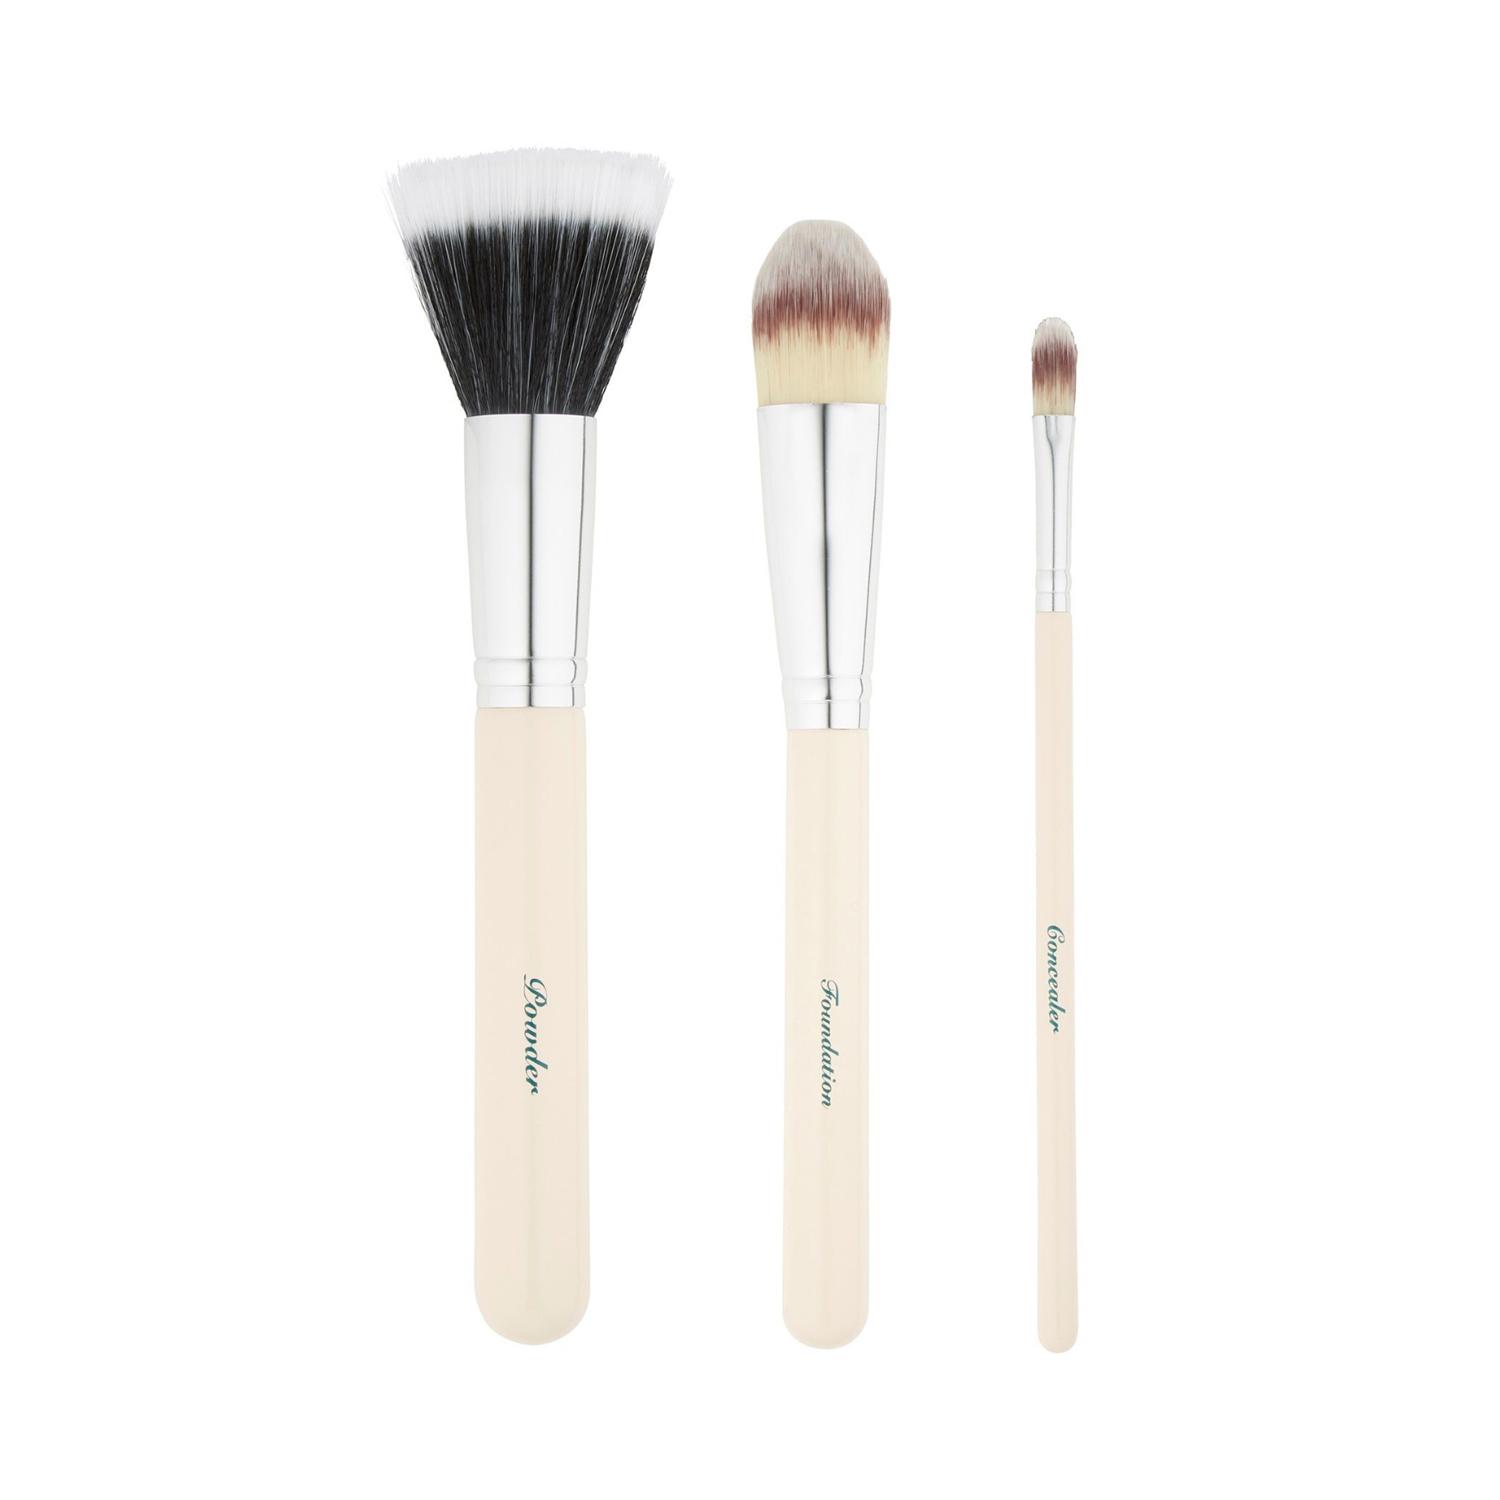 The Vintage Cosmetic Company | The Vintage Cosmetic Company Airbrush Makeup Brush Set (3Pcs)